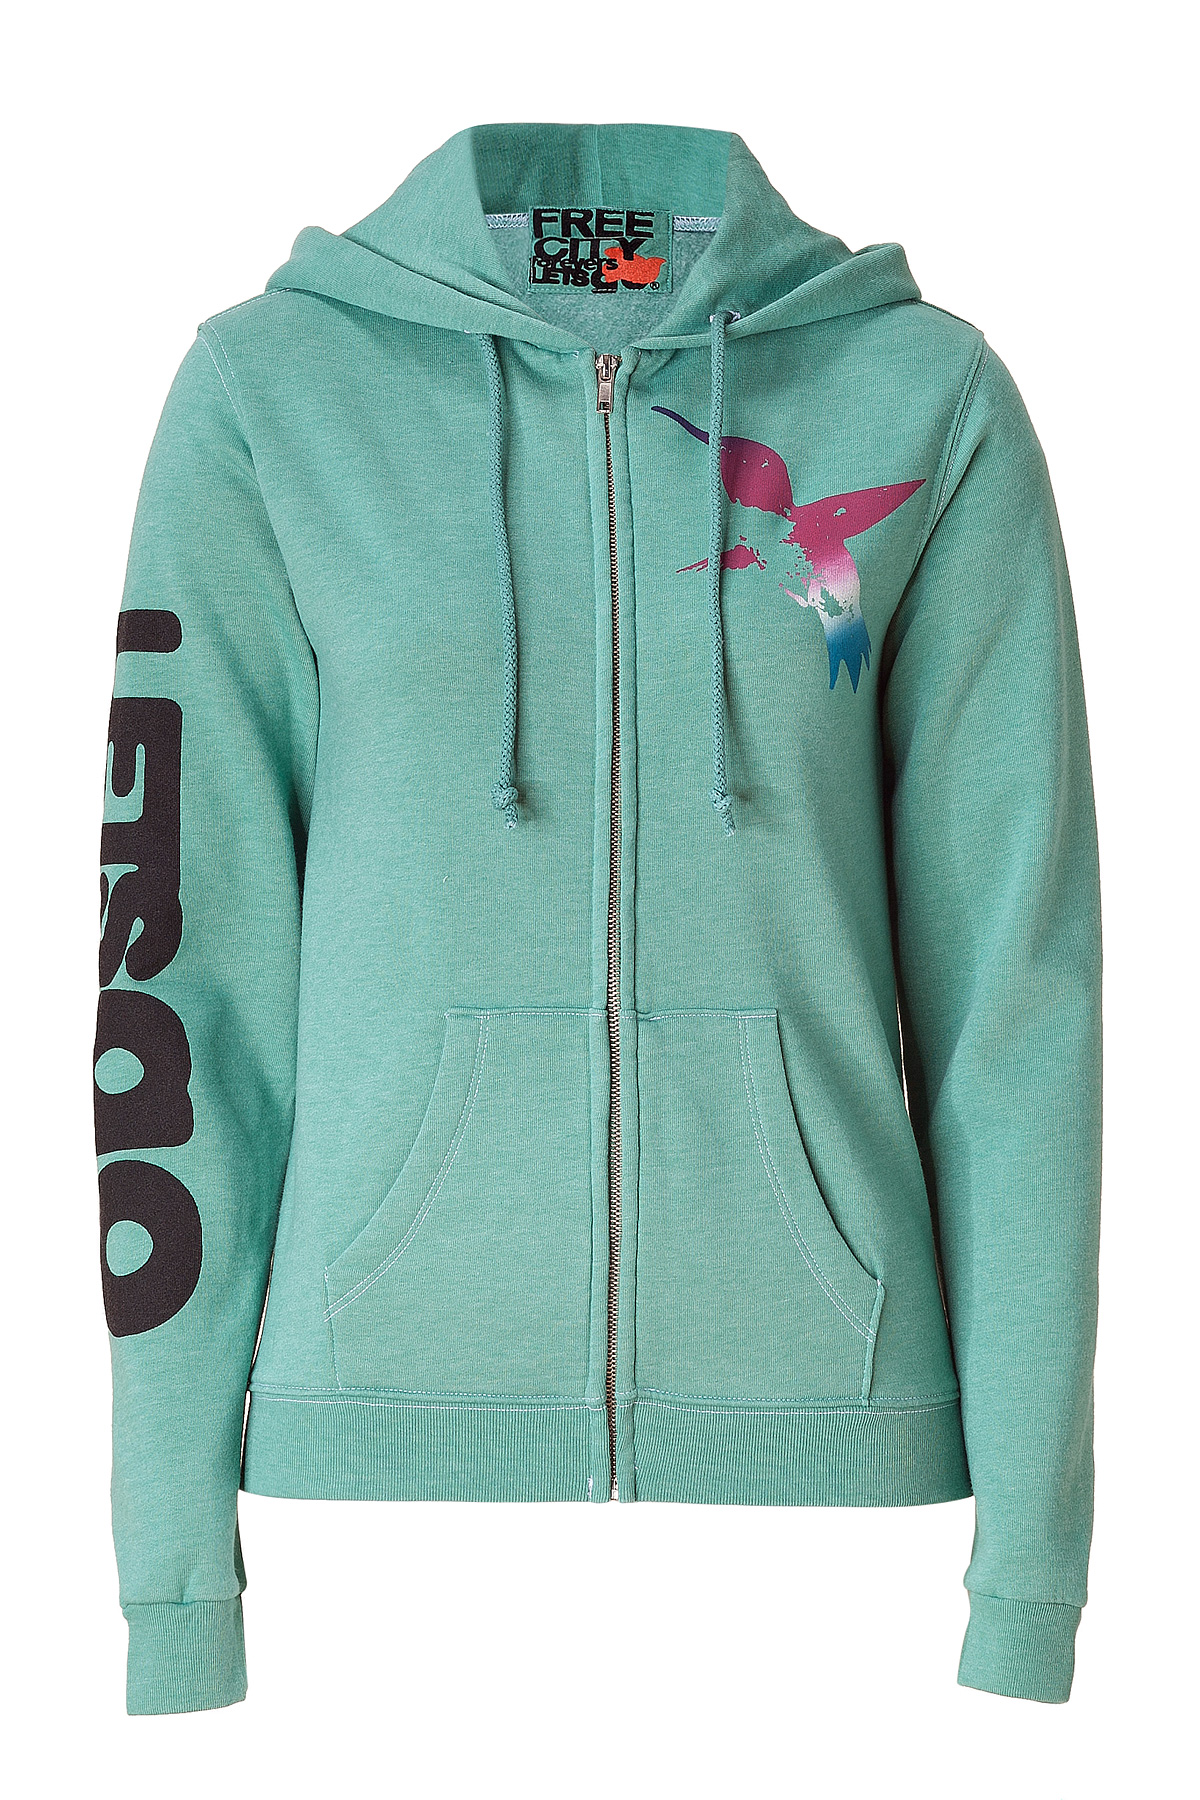 Free City Mint Green Printed Hoodie in Green (mint) | Lyst